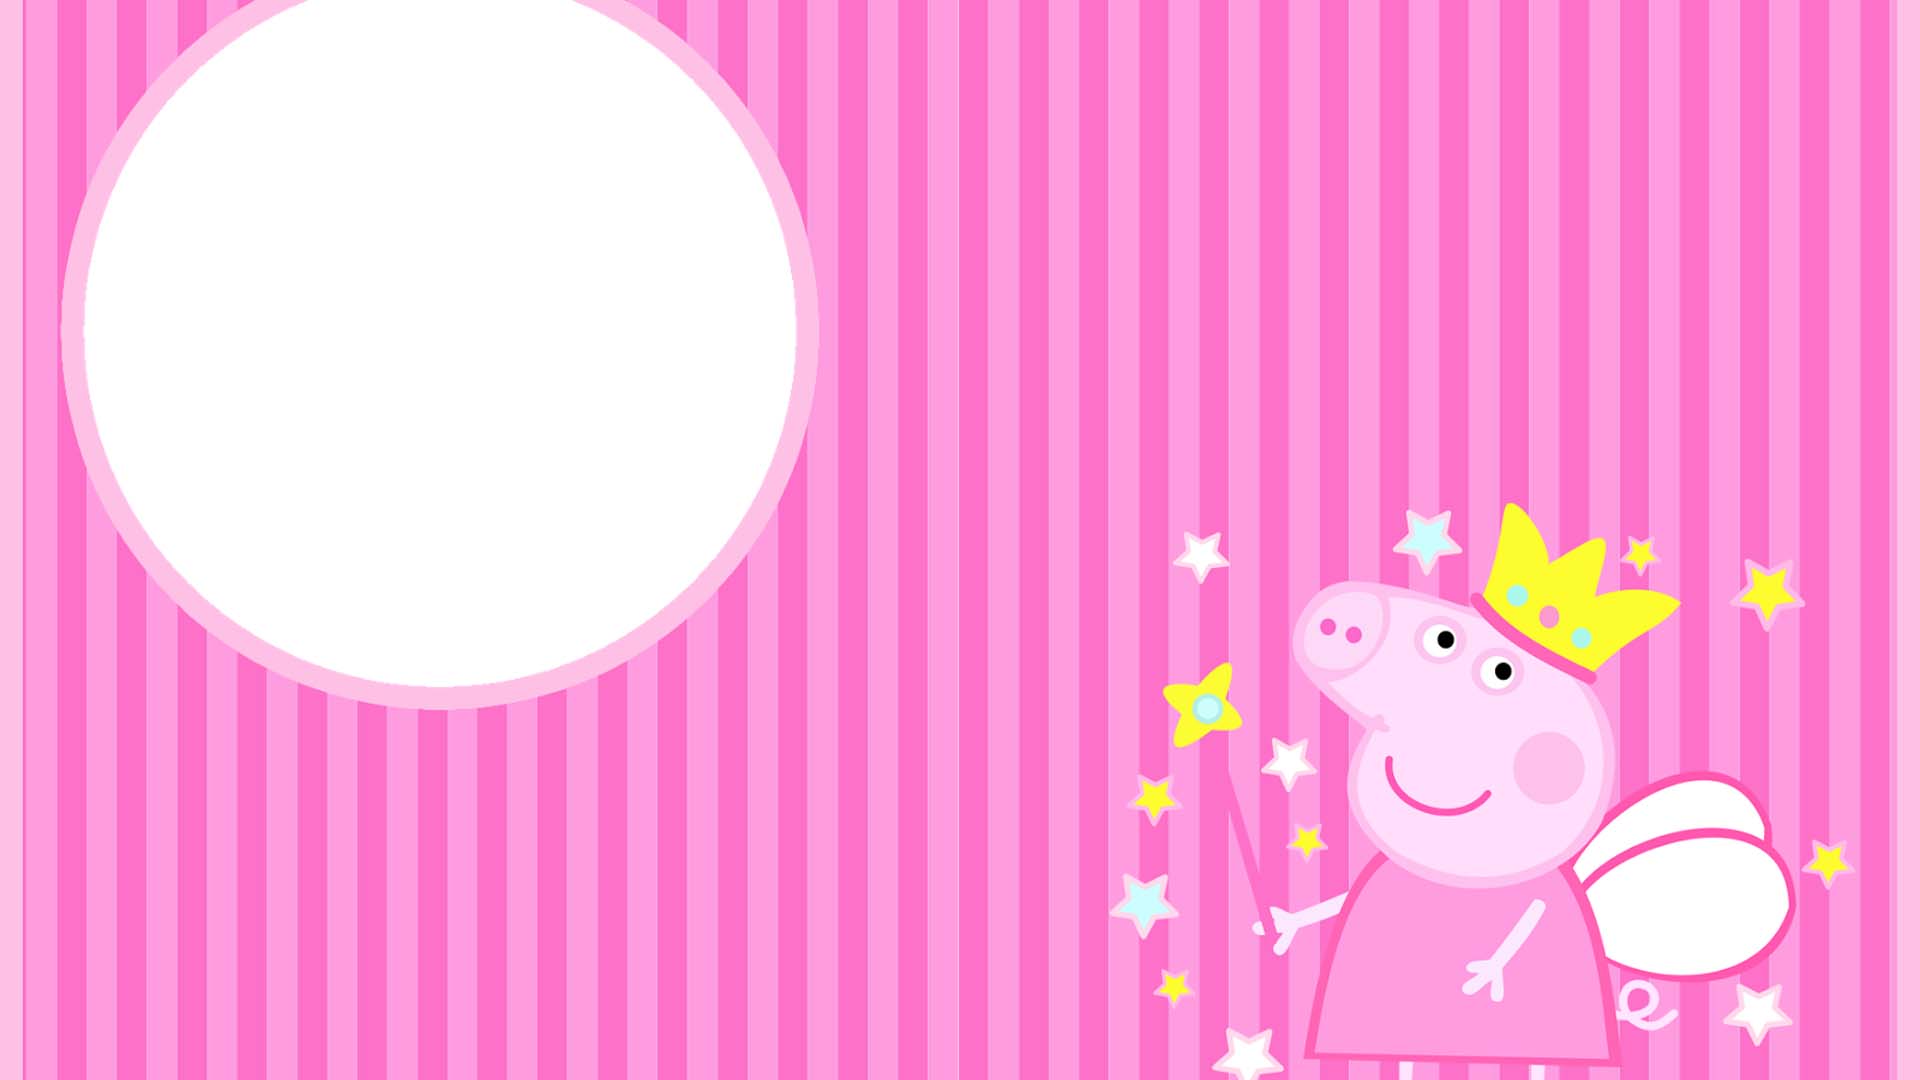 Peppa pig with angel wings and crown in pink Wallpaper 2K anime